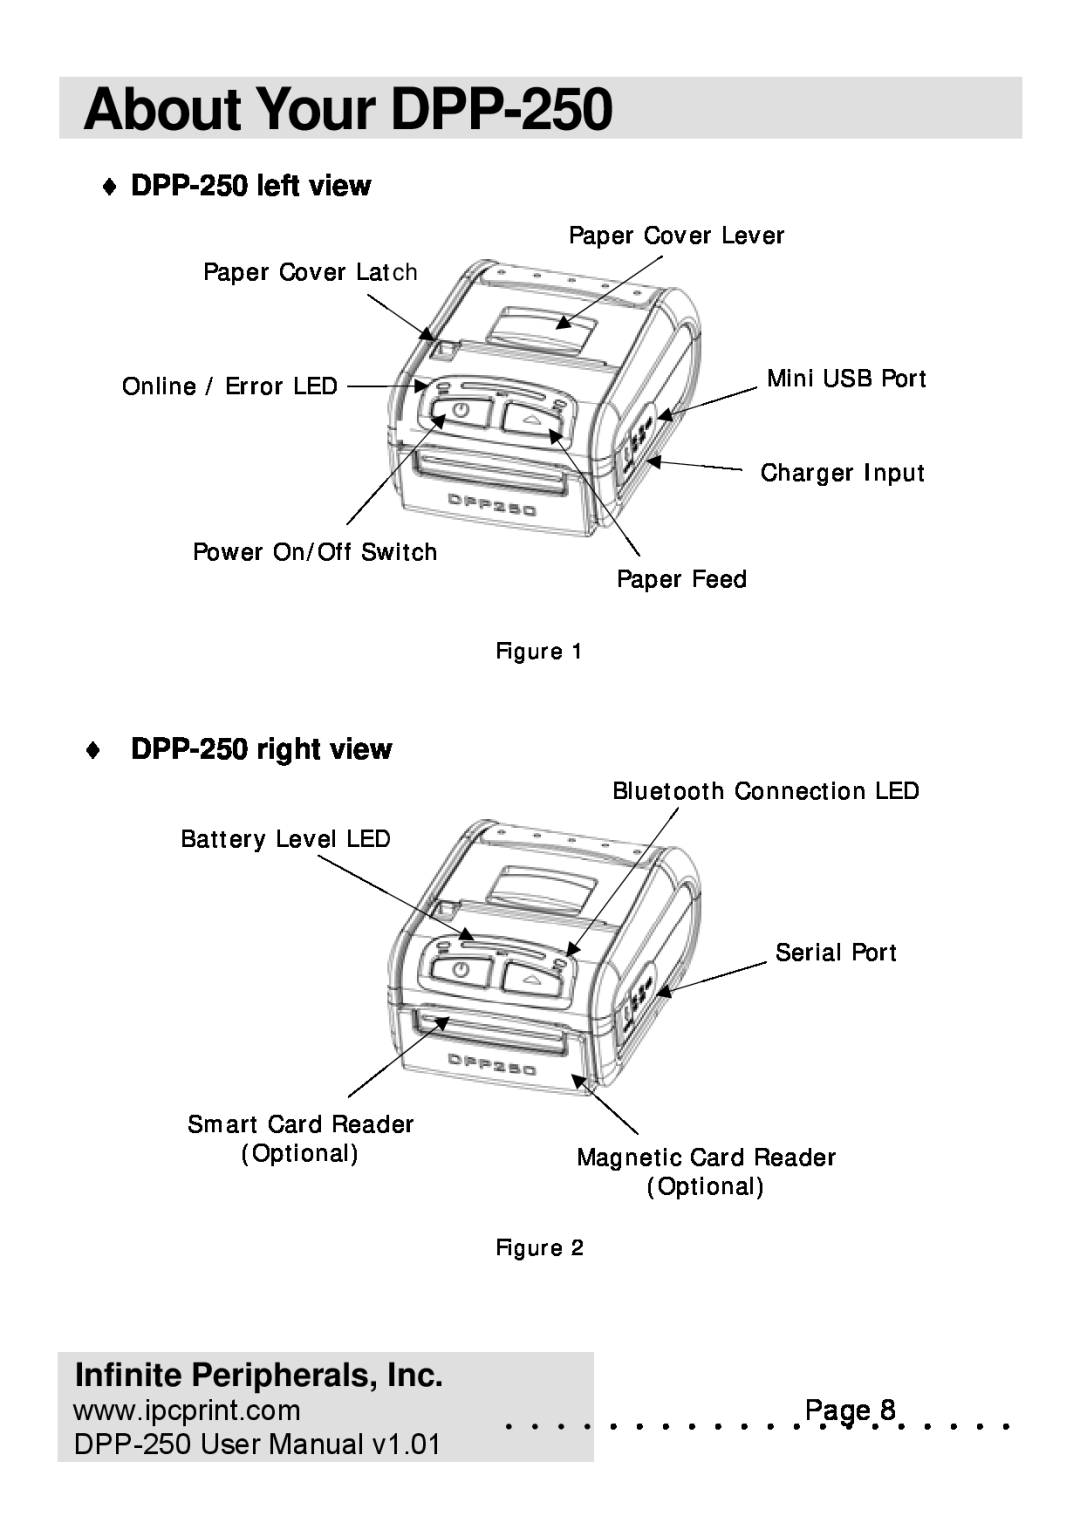 Infinite Peripherals user manual About Your DPP-250, DPP-250 left view, DPP-250 right view, Infinite Peripherals, Inc 